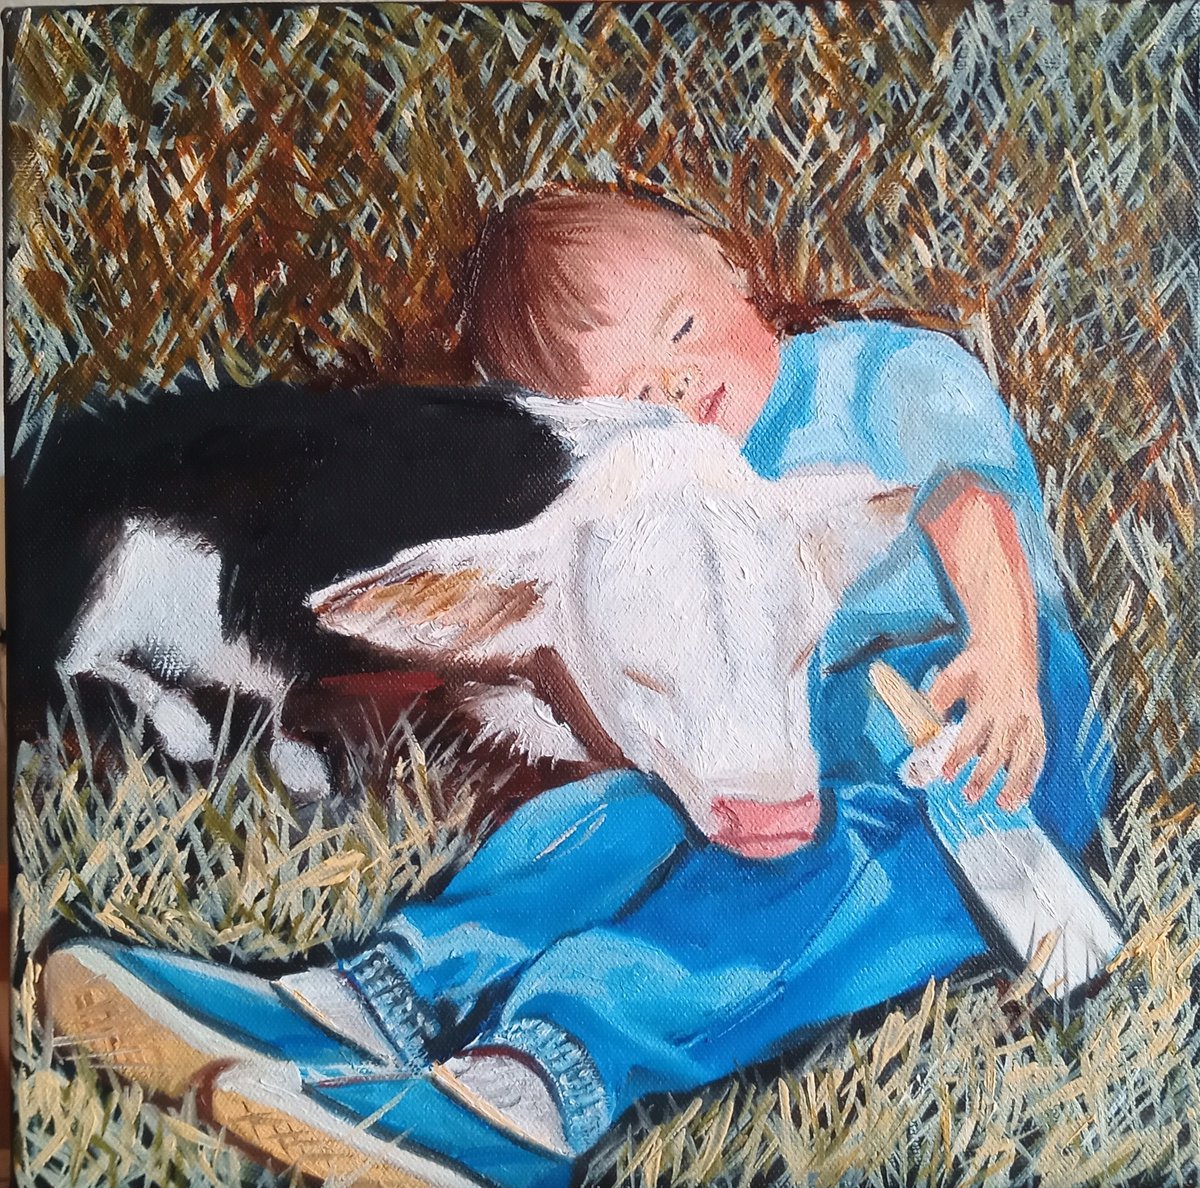 Friends. Boy and Calf by Ira Whittaker